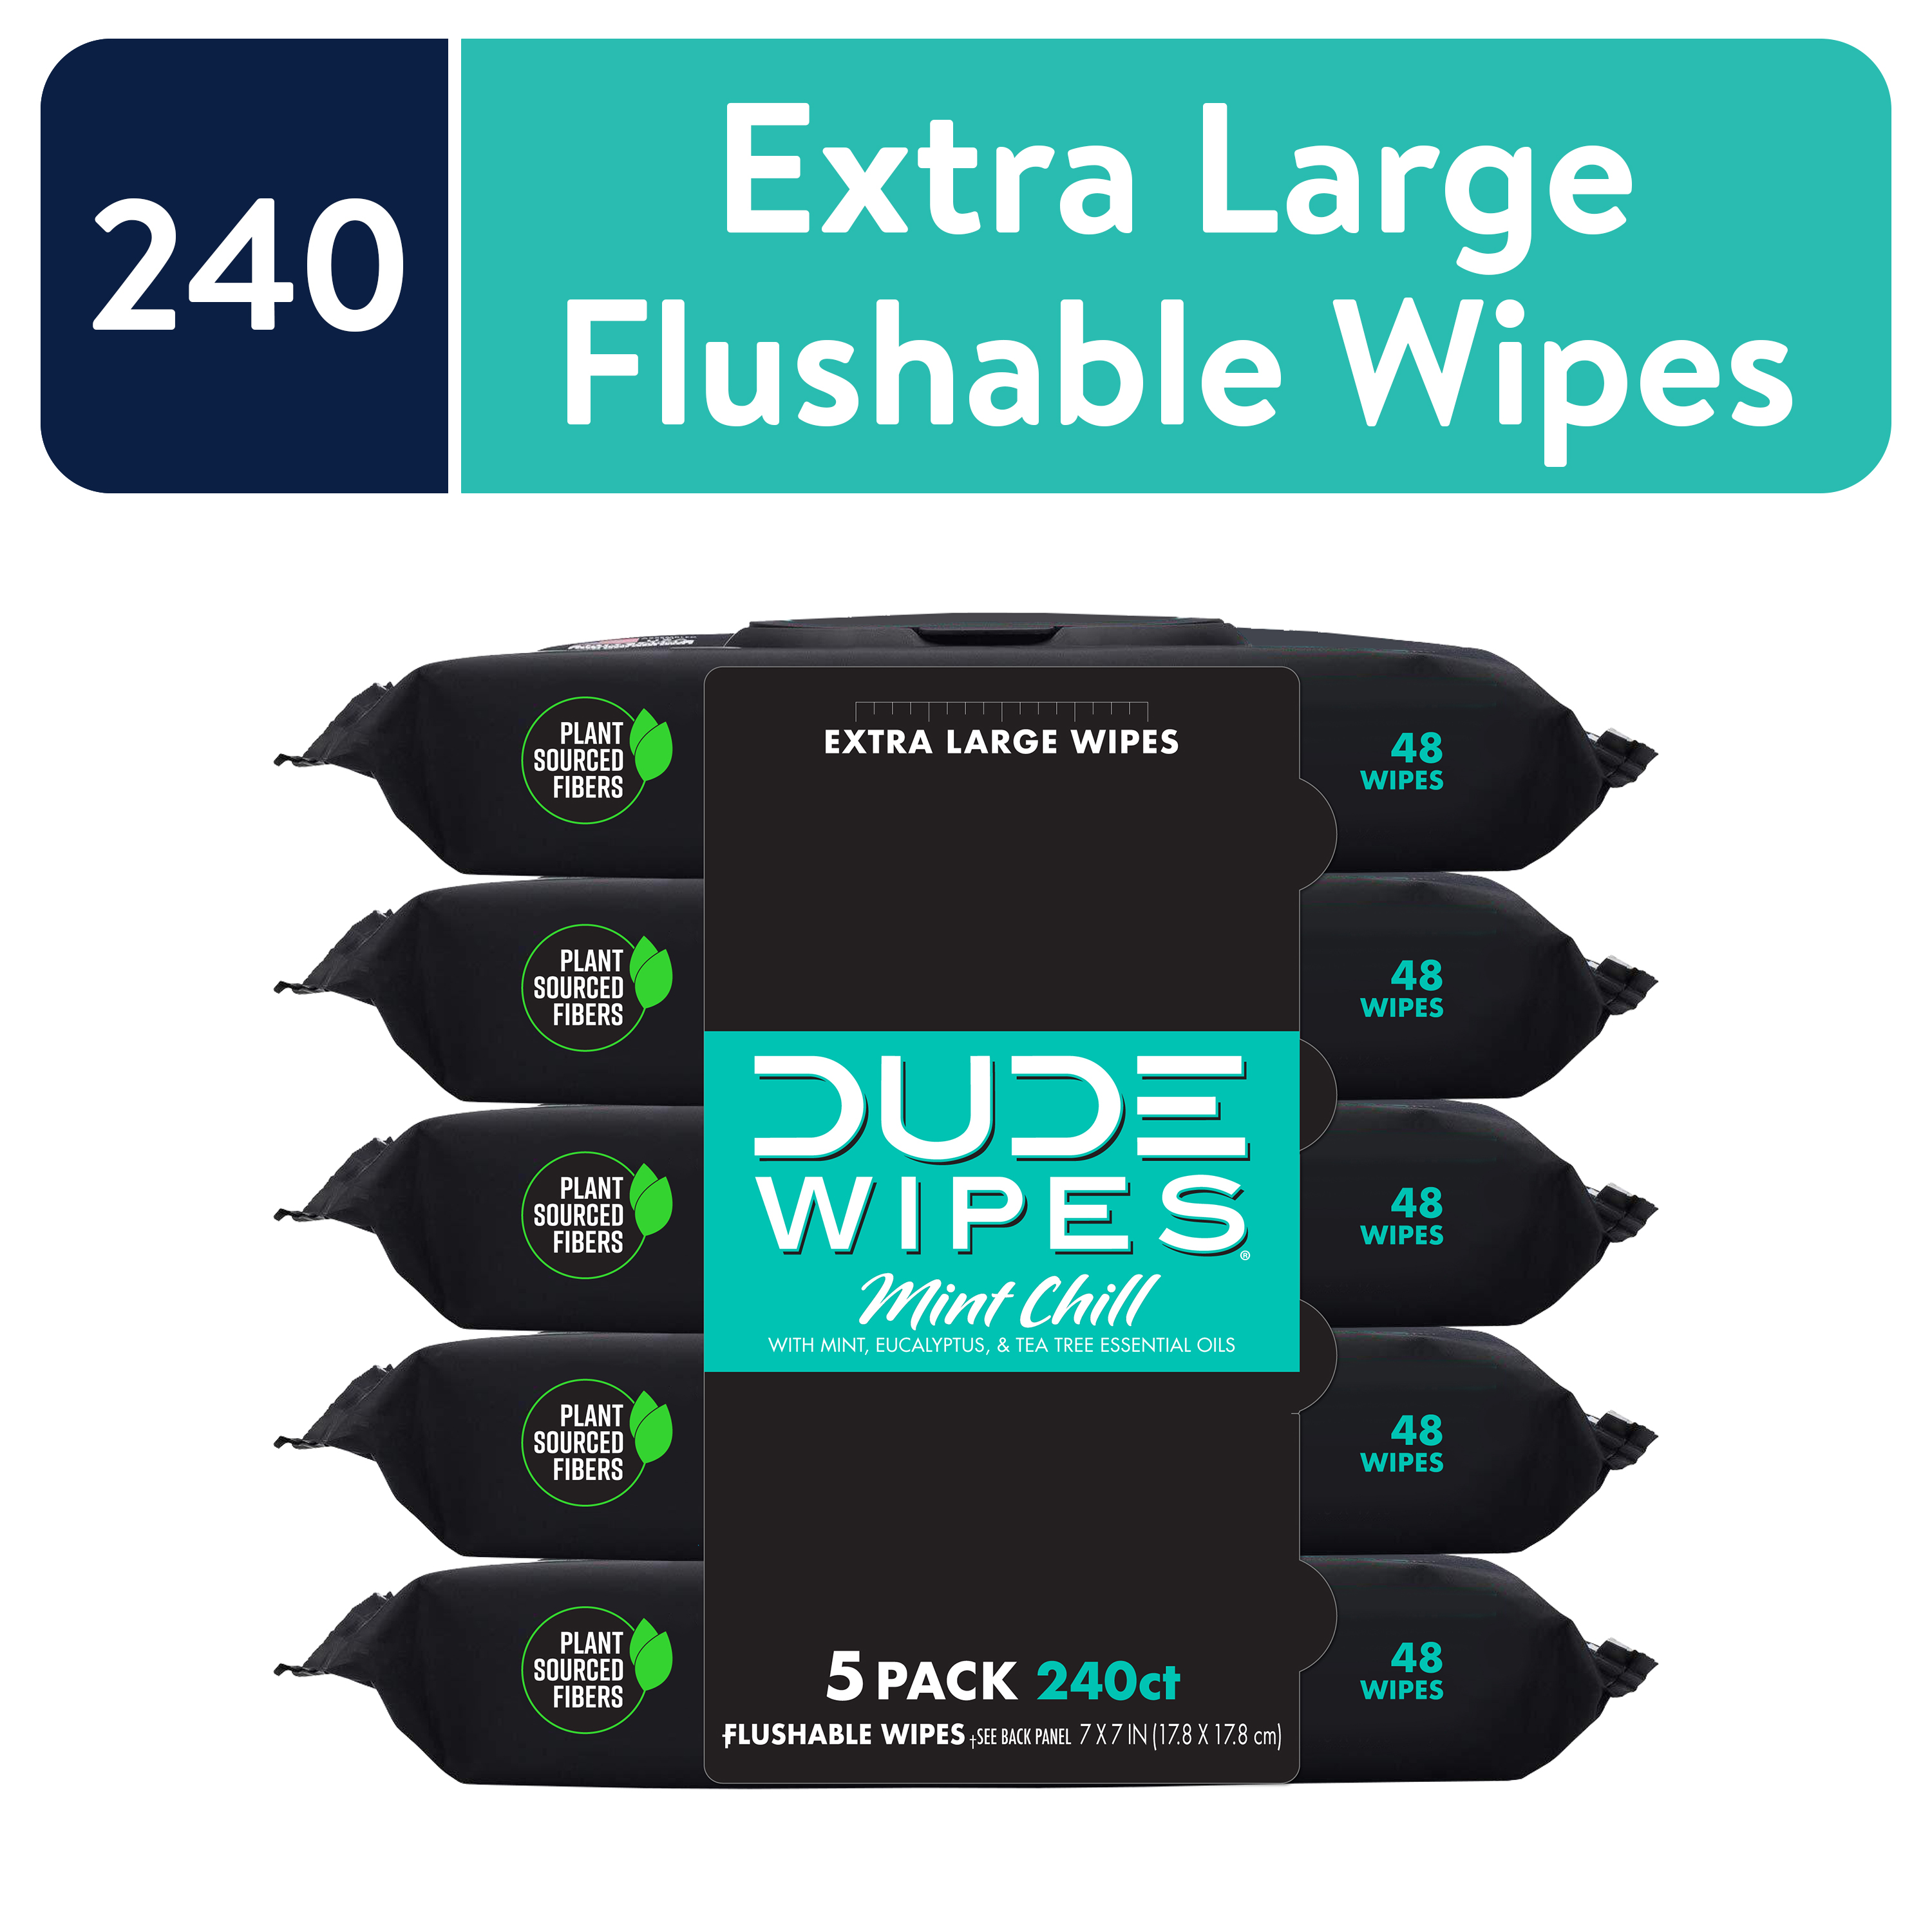 DUDE Wipes Flushable Wipes, XL Wet Wipes for at Home Use, Mint Chill, 48 Count, 5 Pack - image 1 of 8